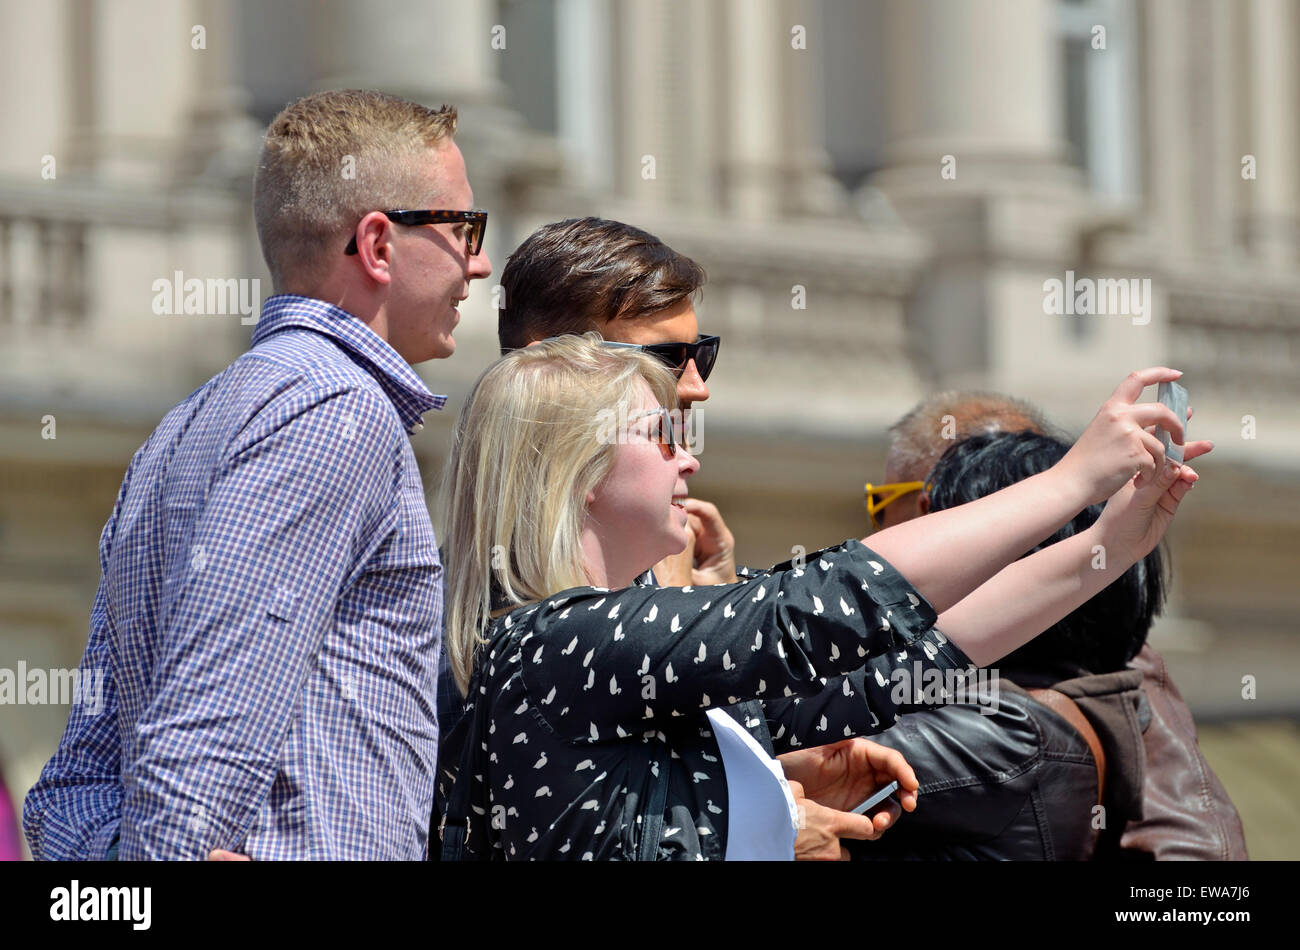 London, England, UK. Three people in Piccadilly Circus taking a group selfie Stock Photo